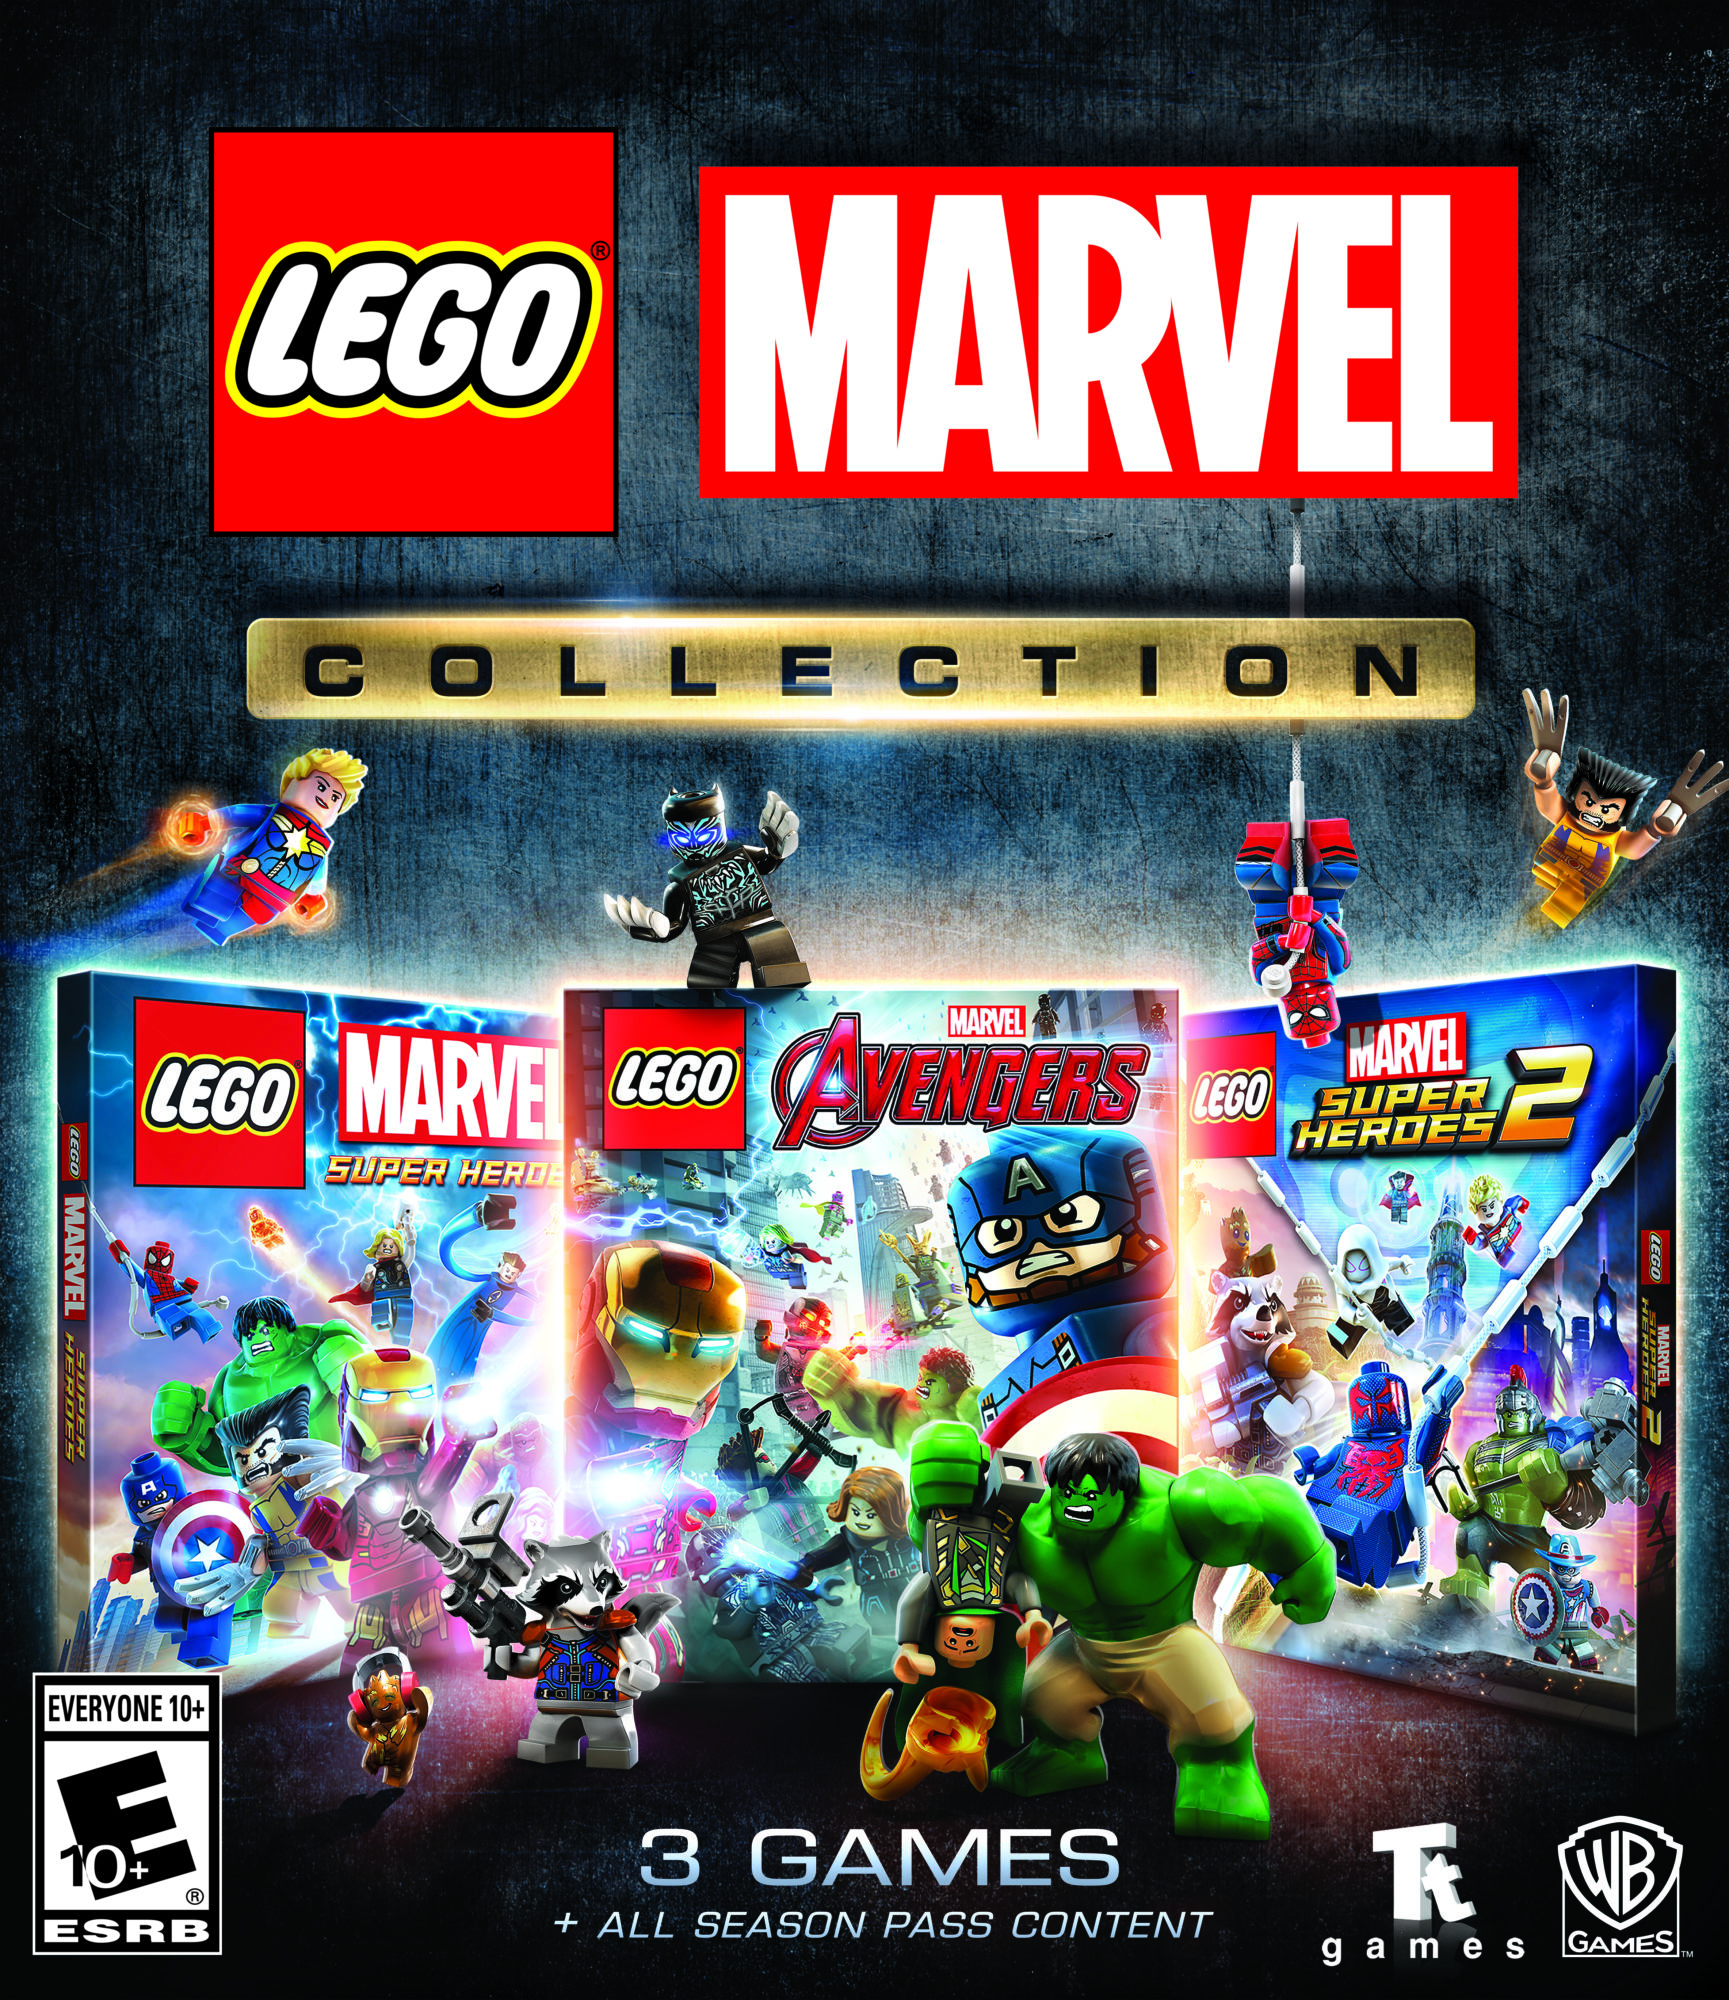 lego video games for switch